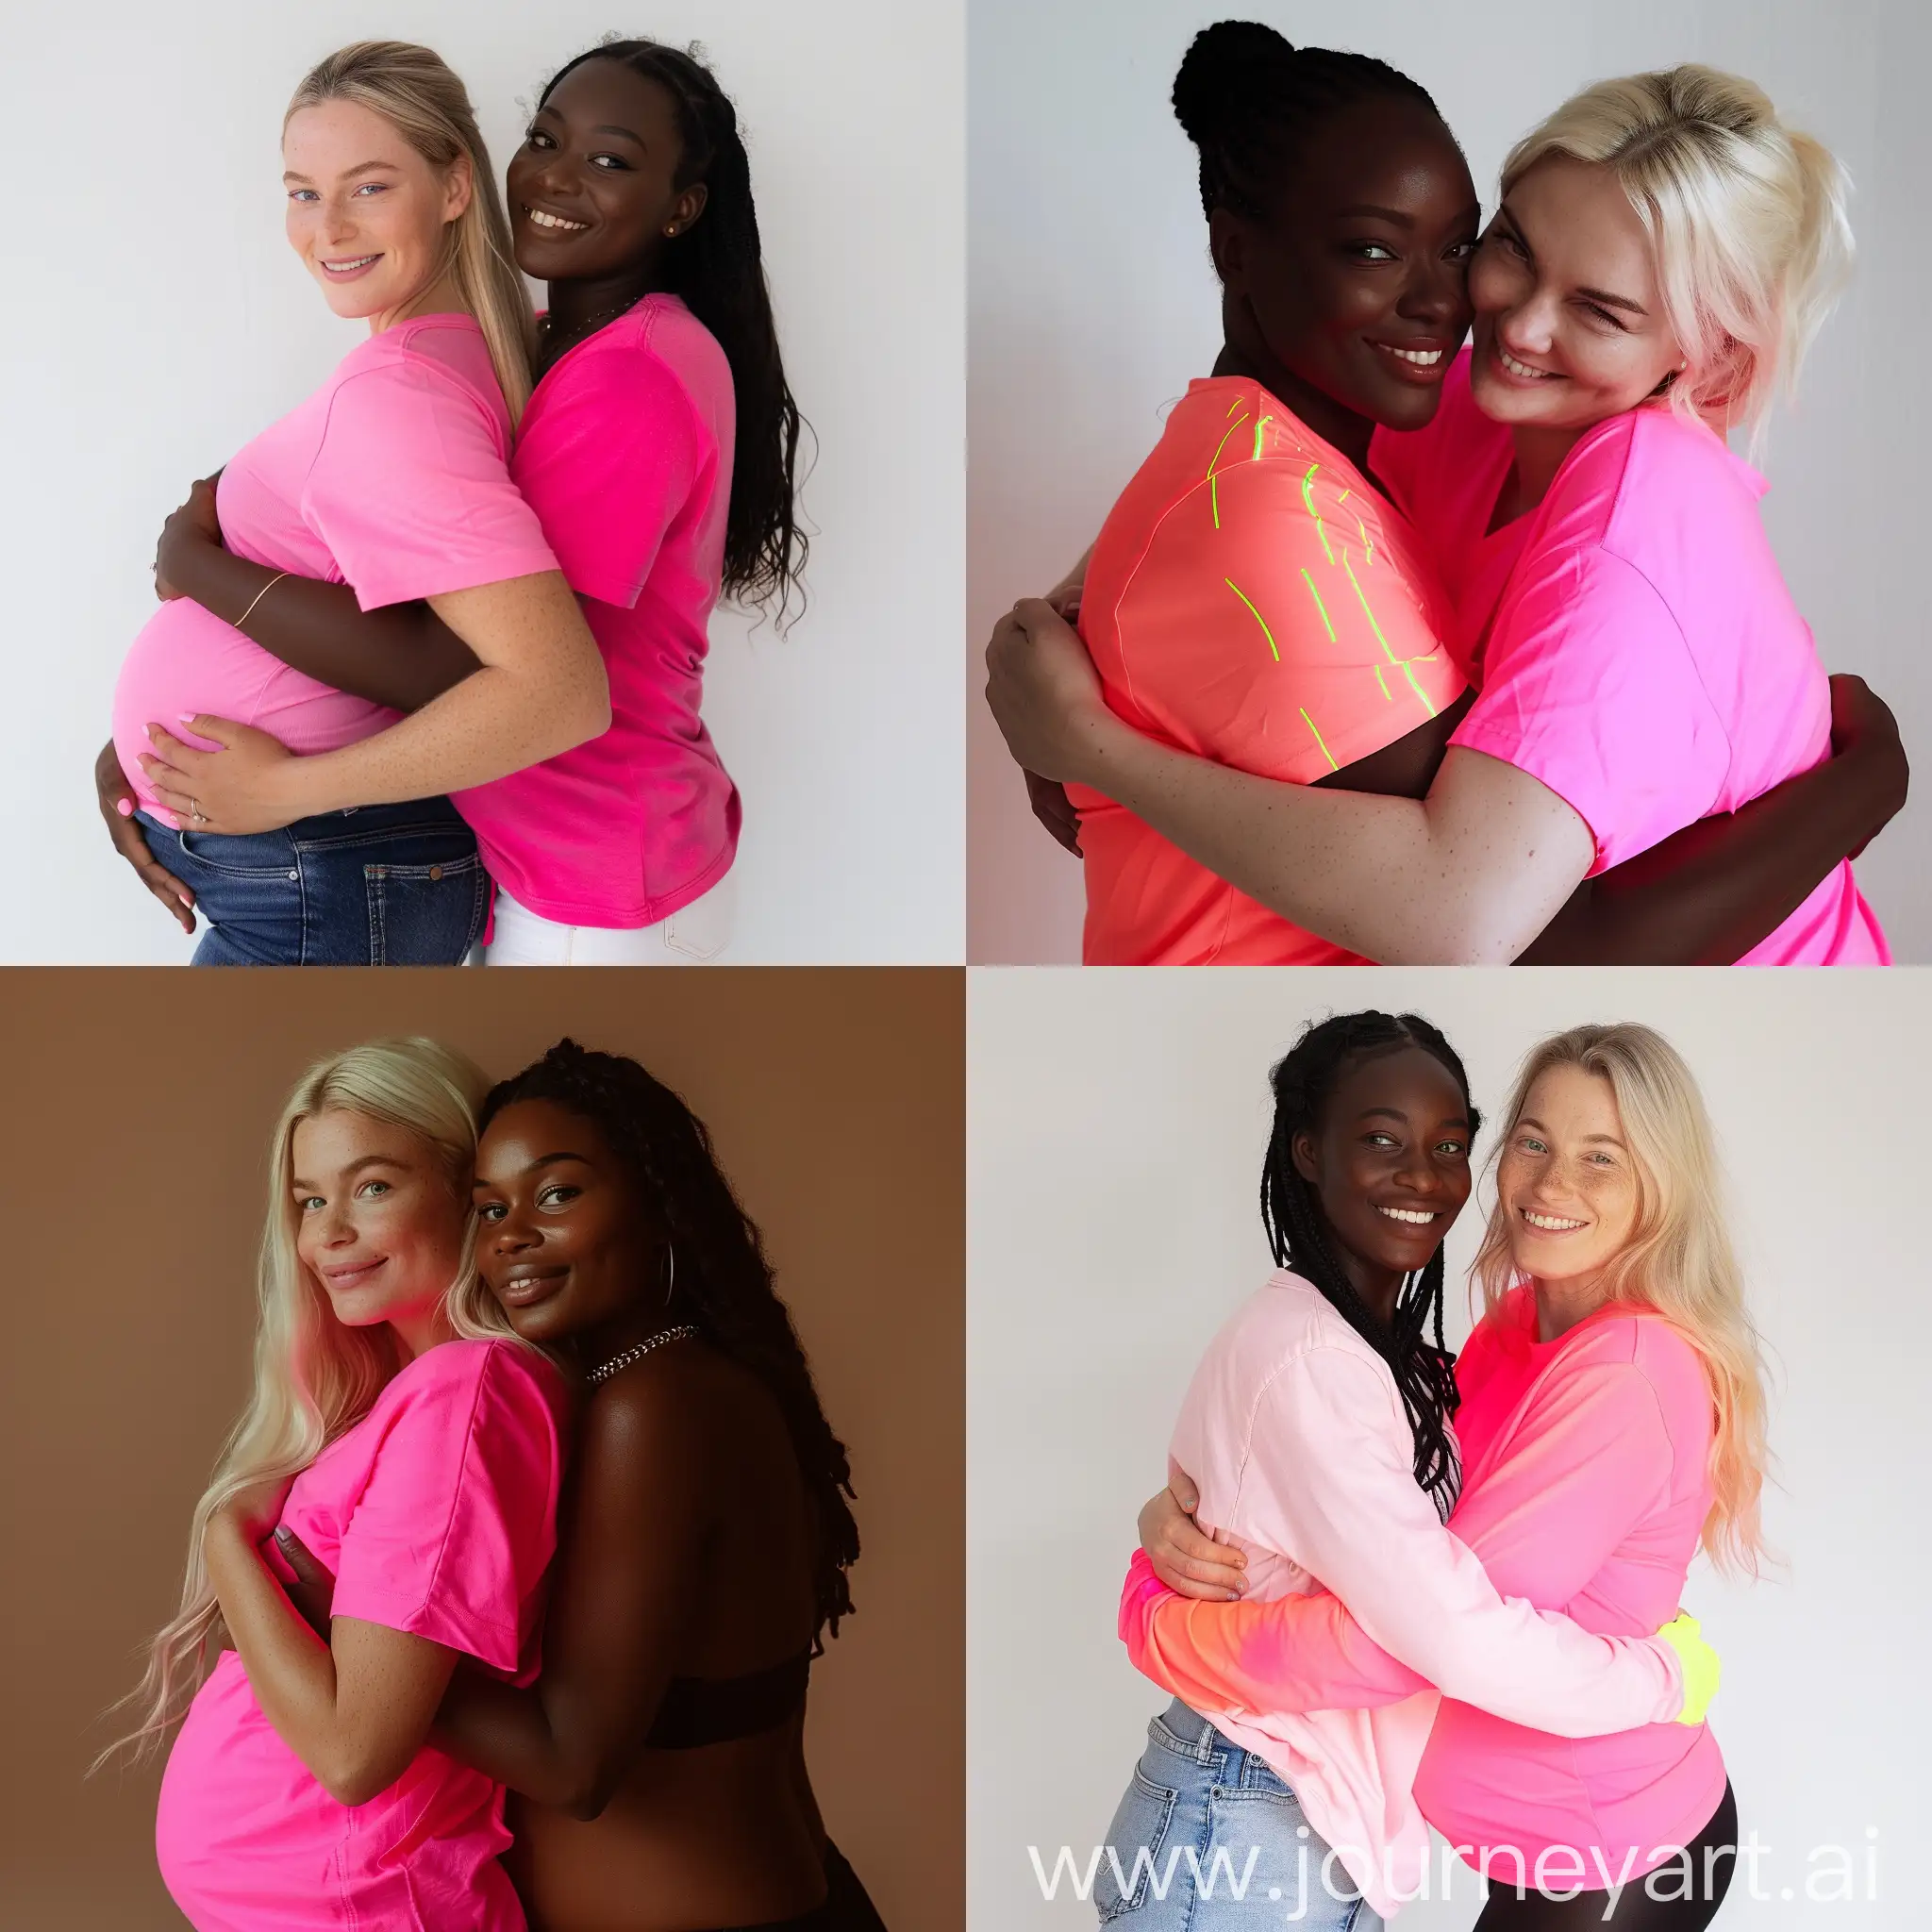 Two Lesbian 21 years sleeve short tee-shirt pink neon and weight medium and white European skin back hug and black African skin pregnant  